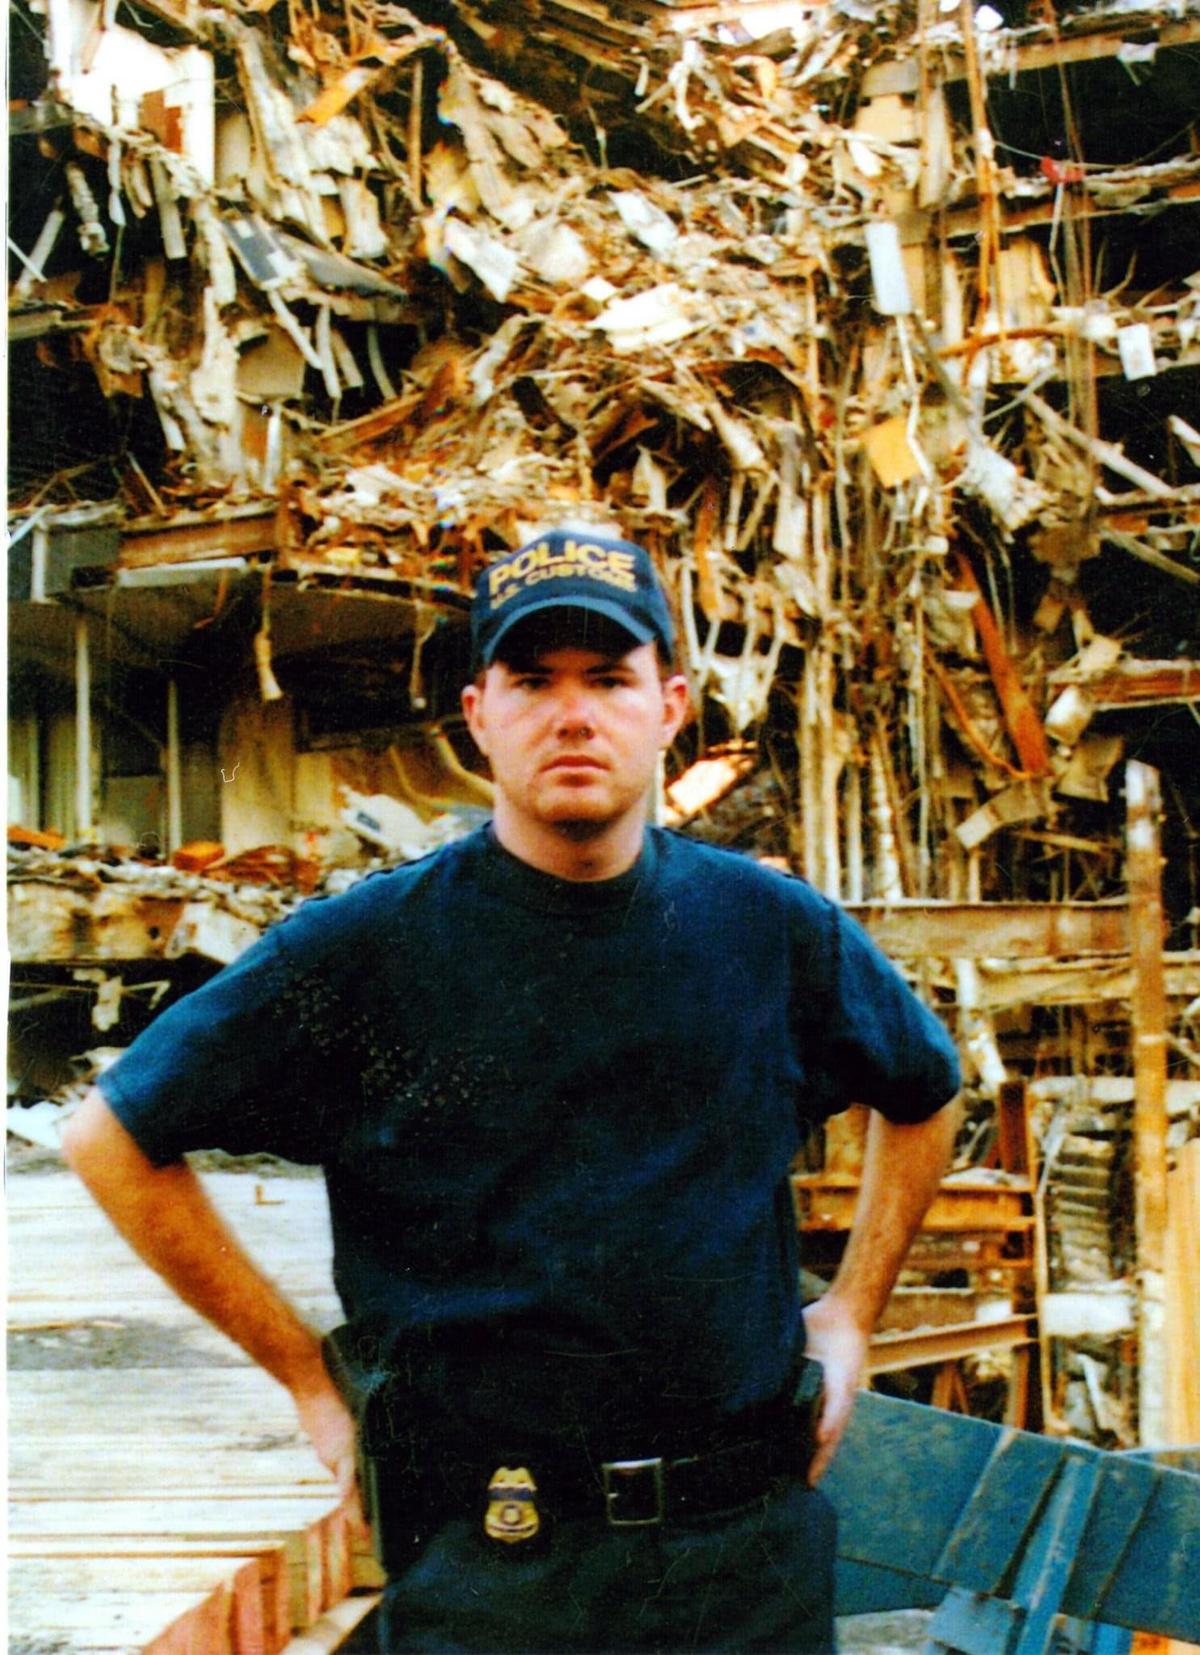 James Deboer in New York City during the 9/11 recovery efforts. (Courtesy James Deboer)